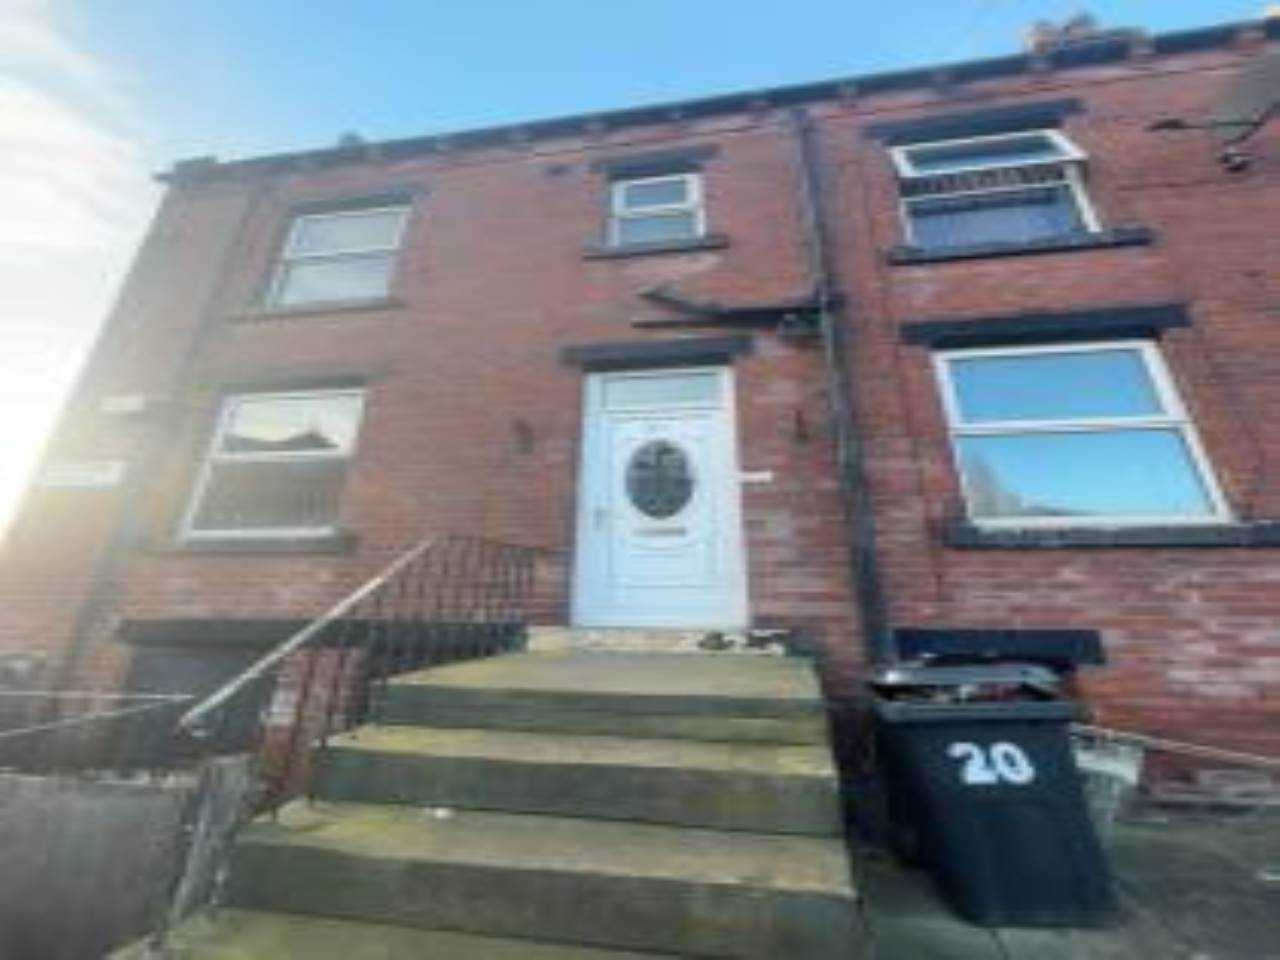 Mitford Place (room 1), Armley, Leeds